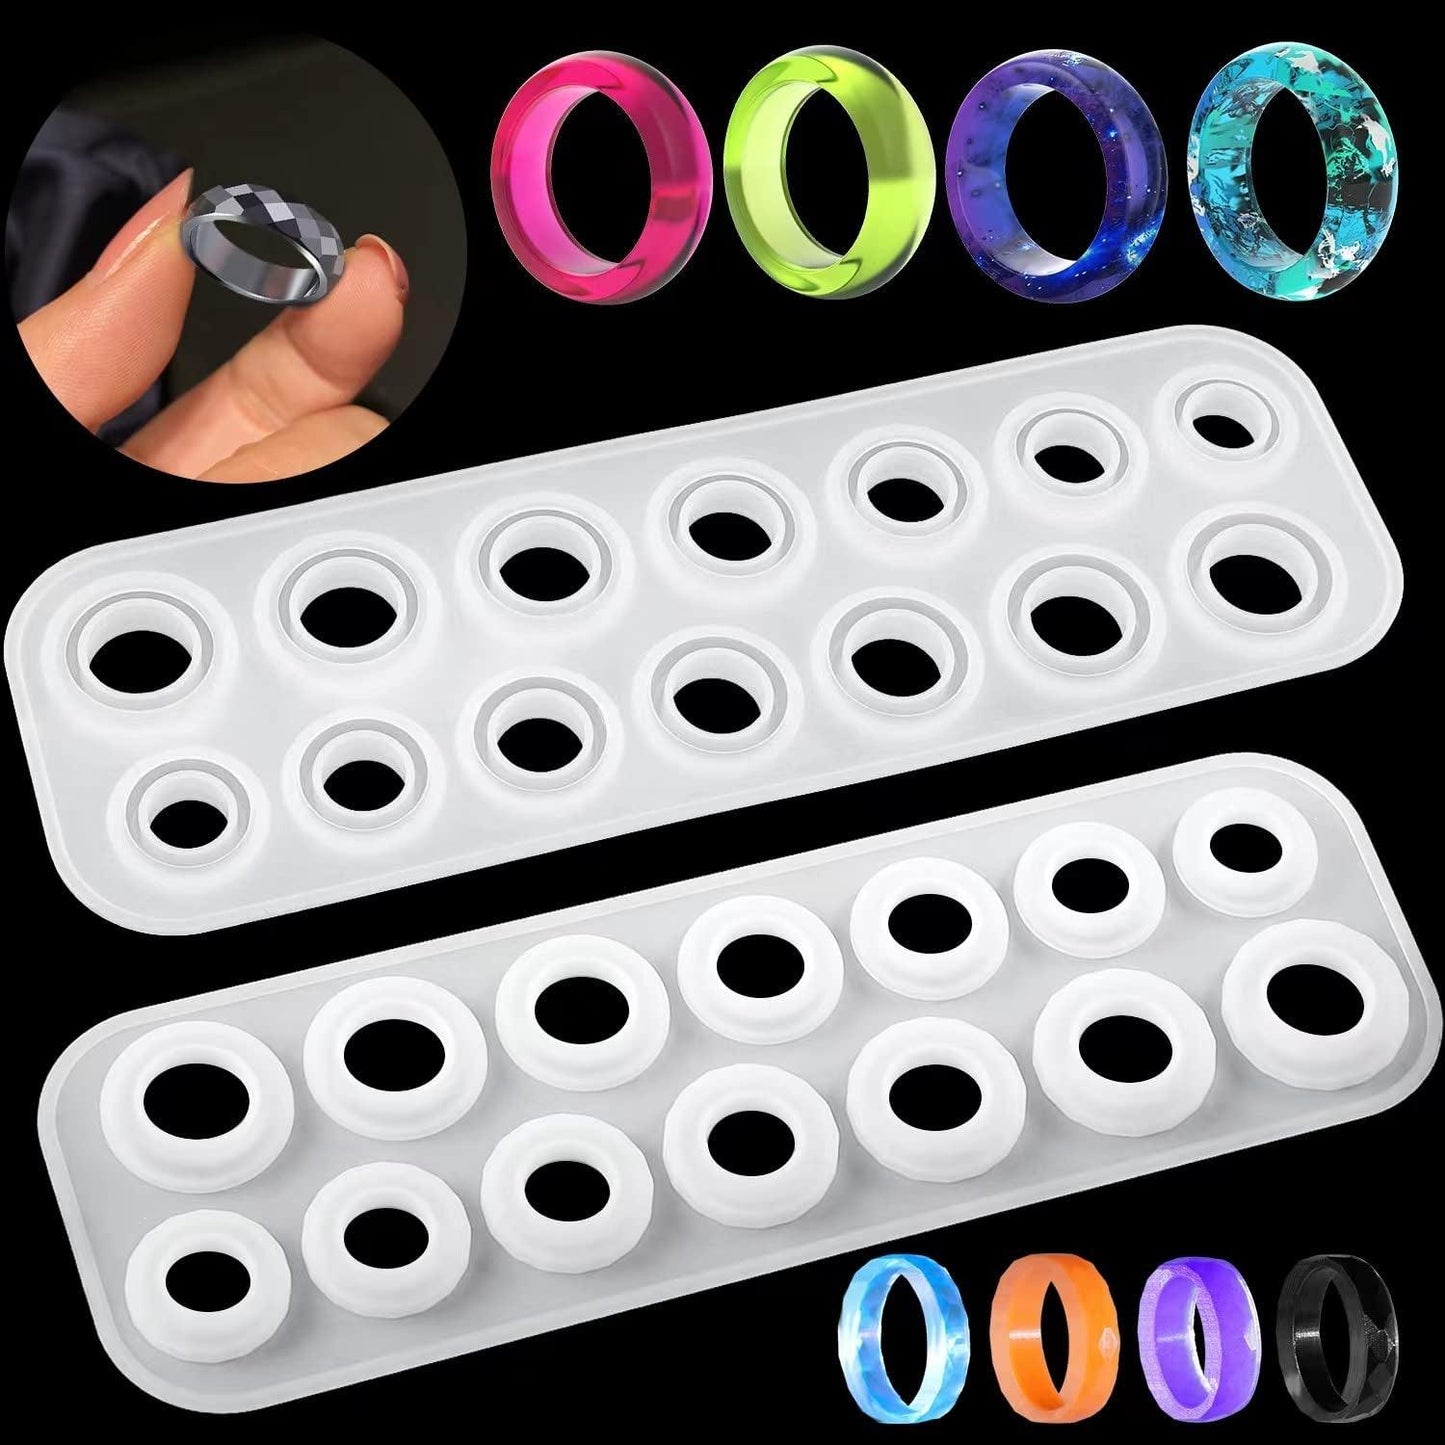 Resin Ring Molds Silicone, Silicone for Epoxy Resin, 14 Sizes with round and Rhombic Faces Making Rings, Earrings, Pendants, Crafts Christmas Gifts - WoodArtSupply